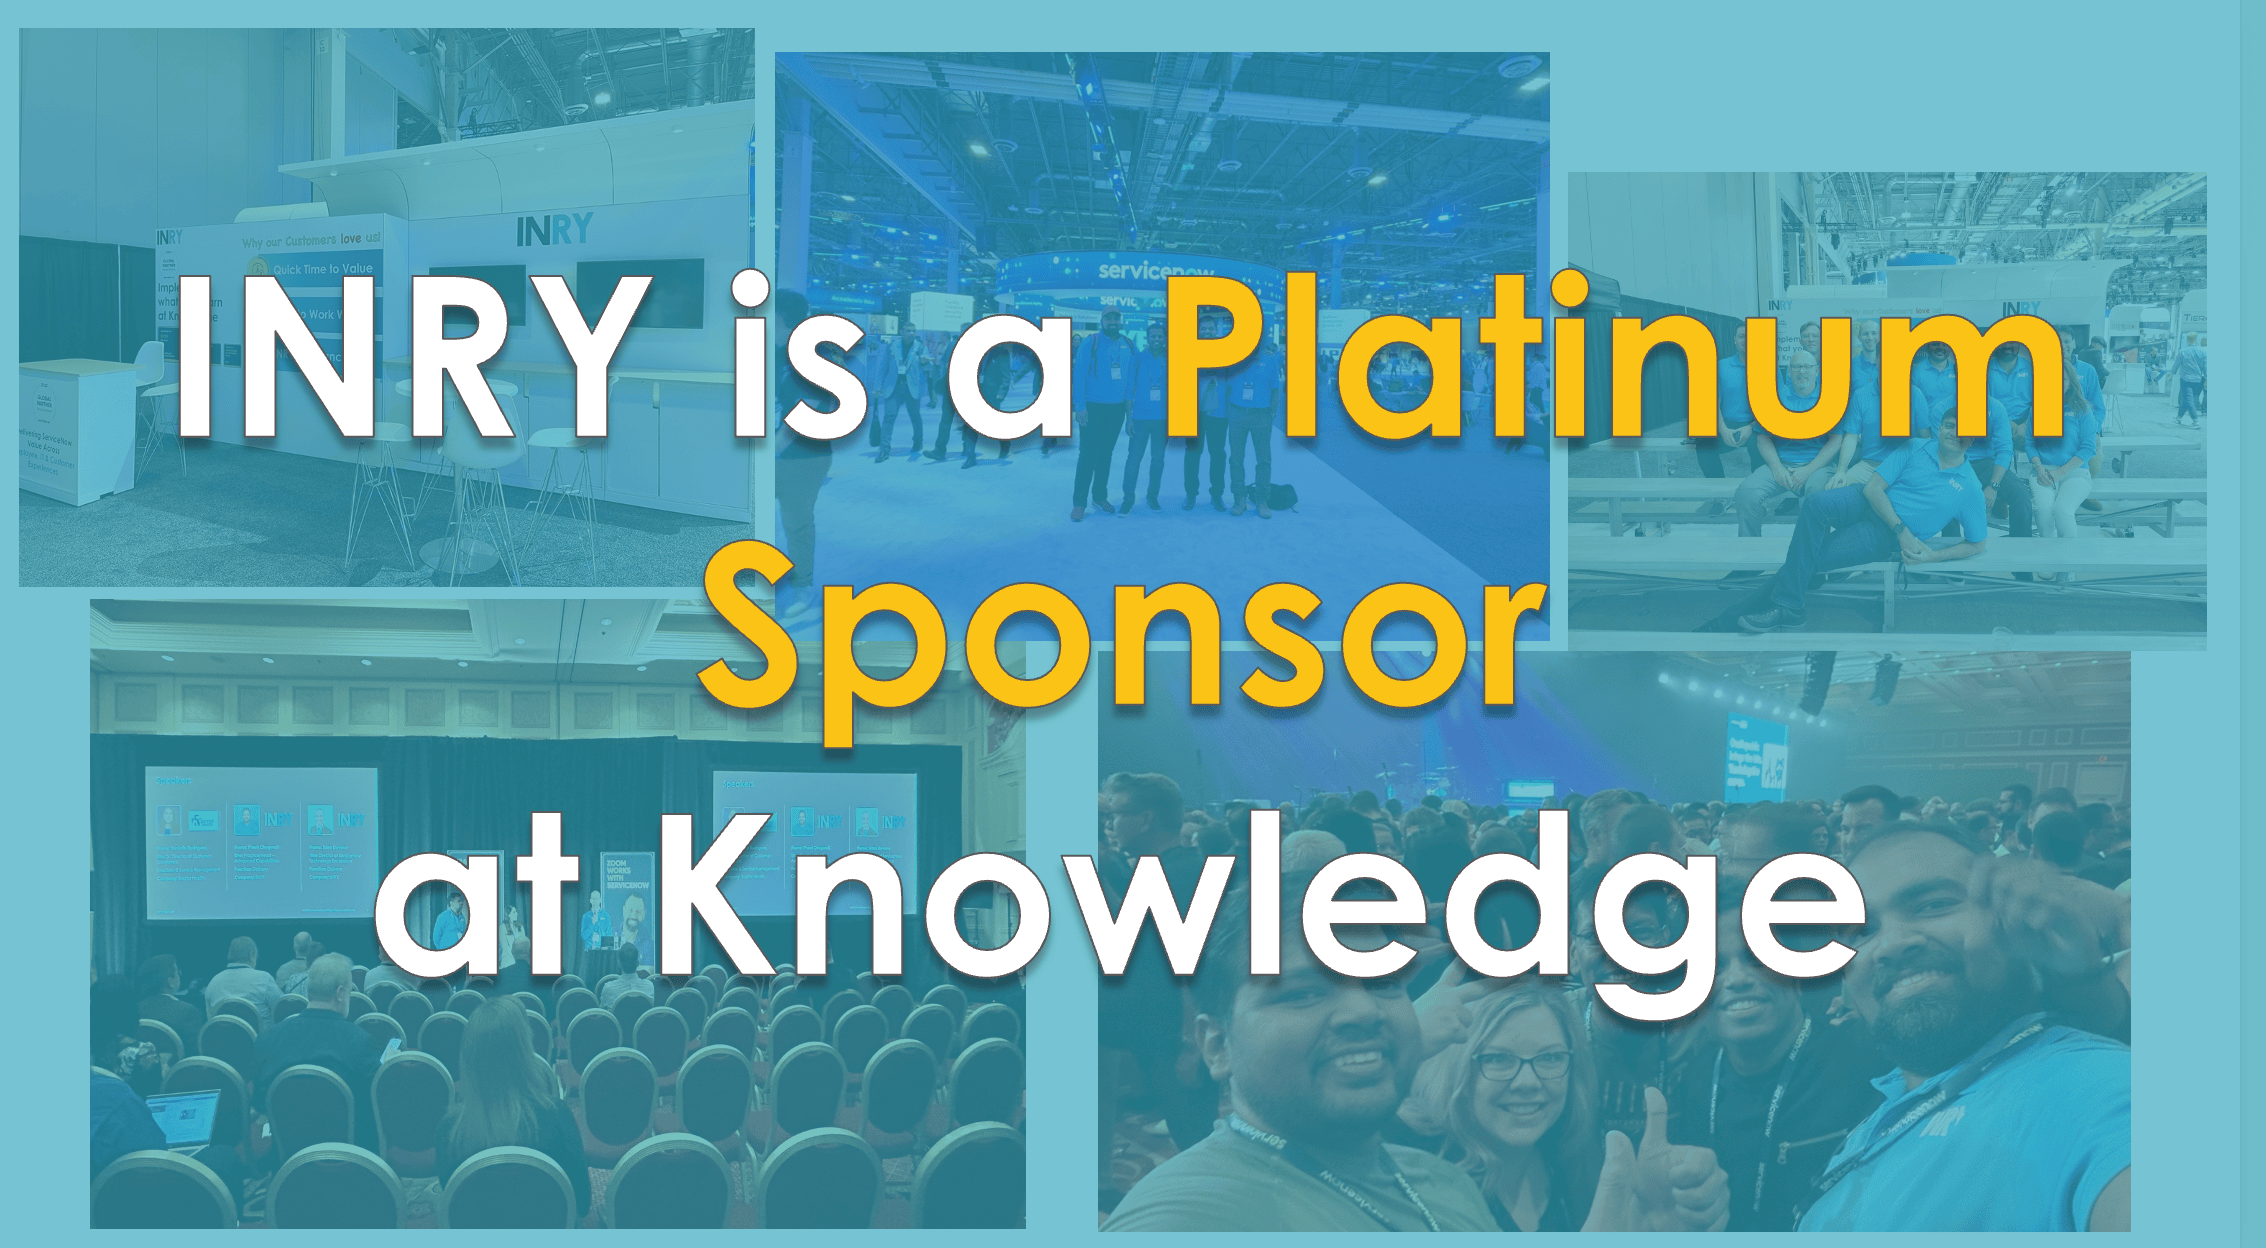 Join INRY at Knowledge24